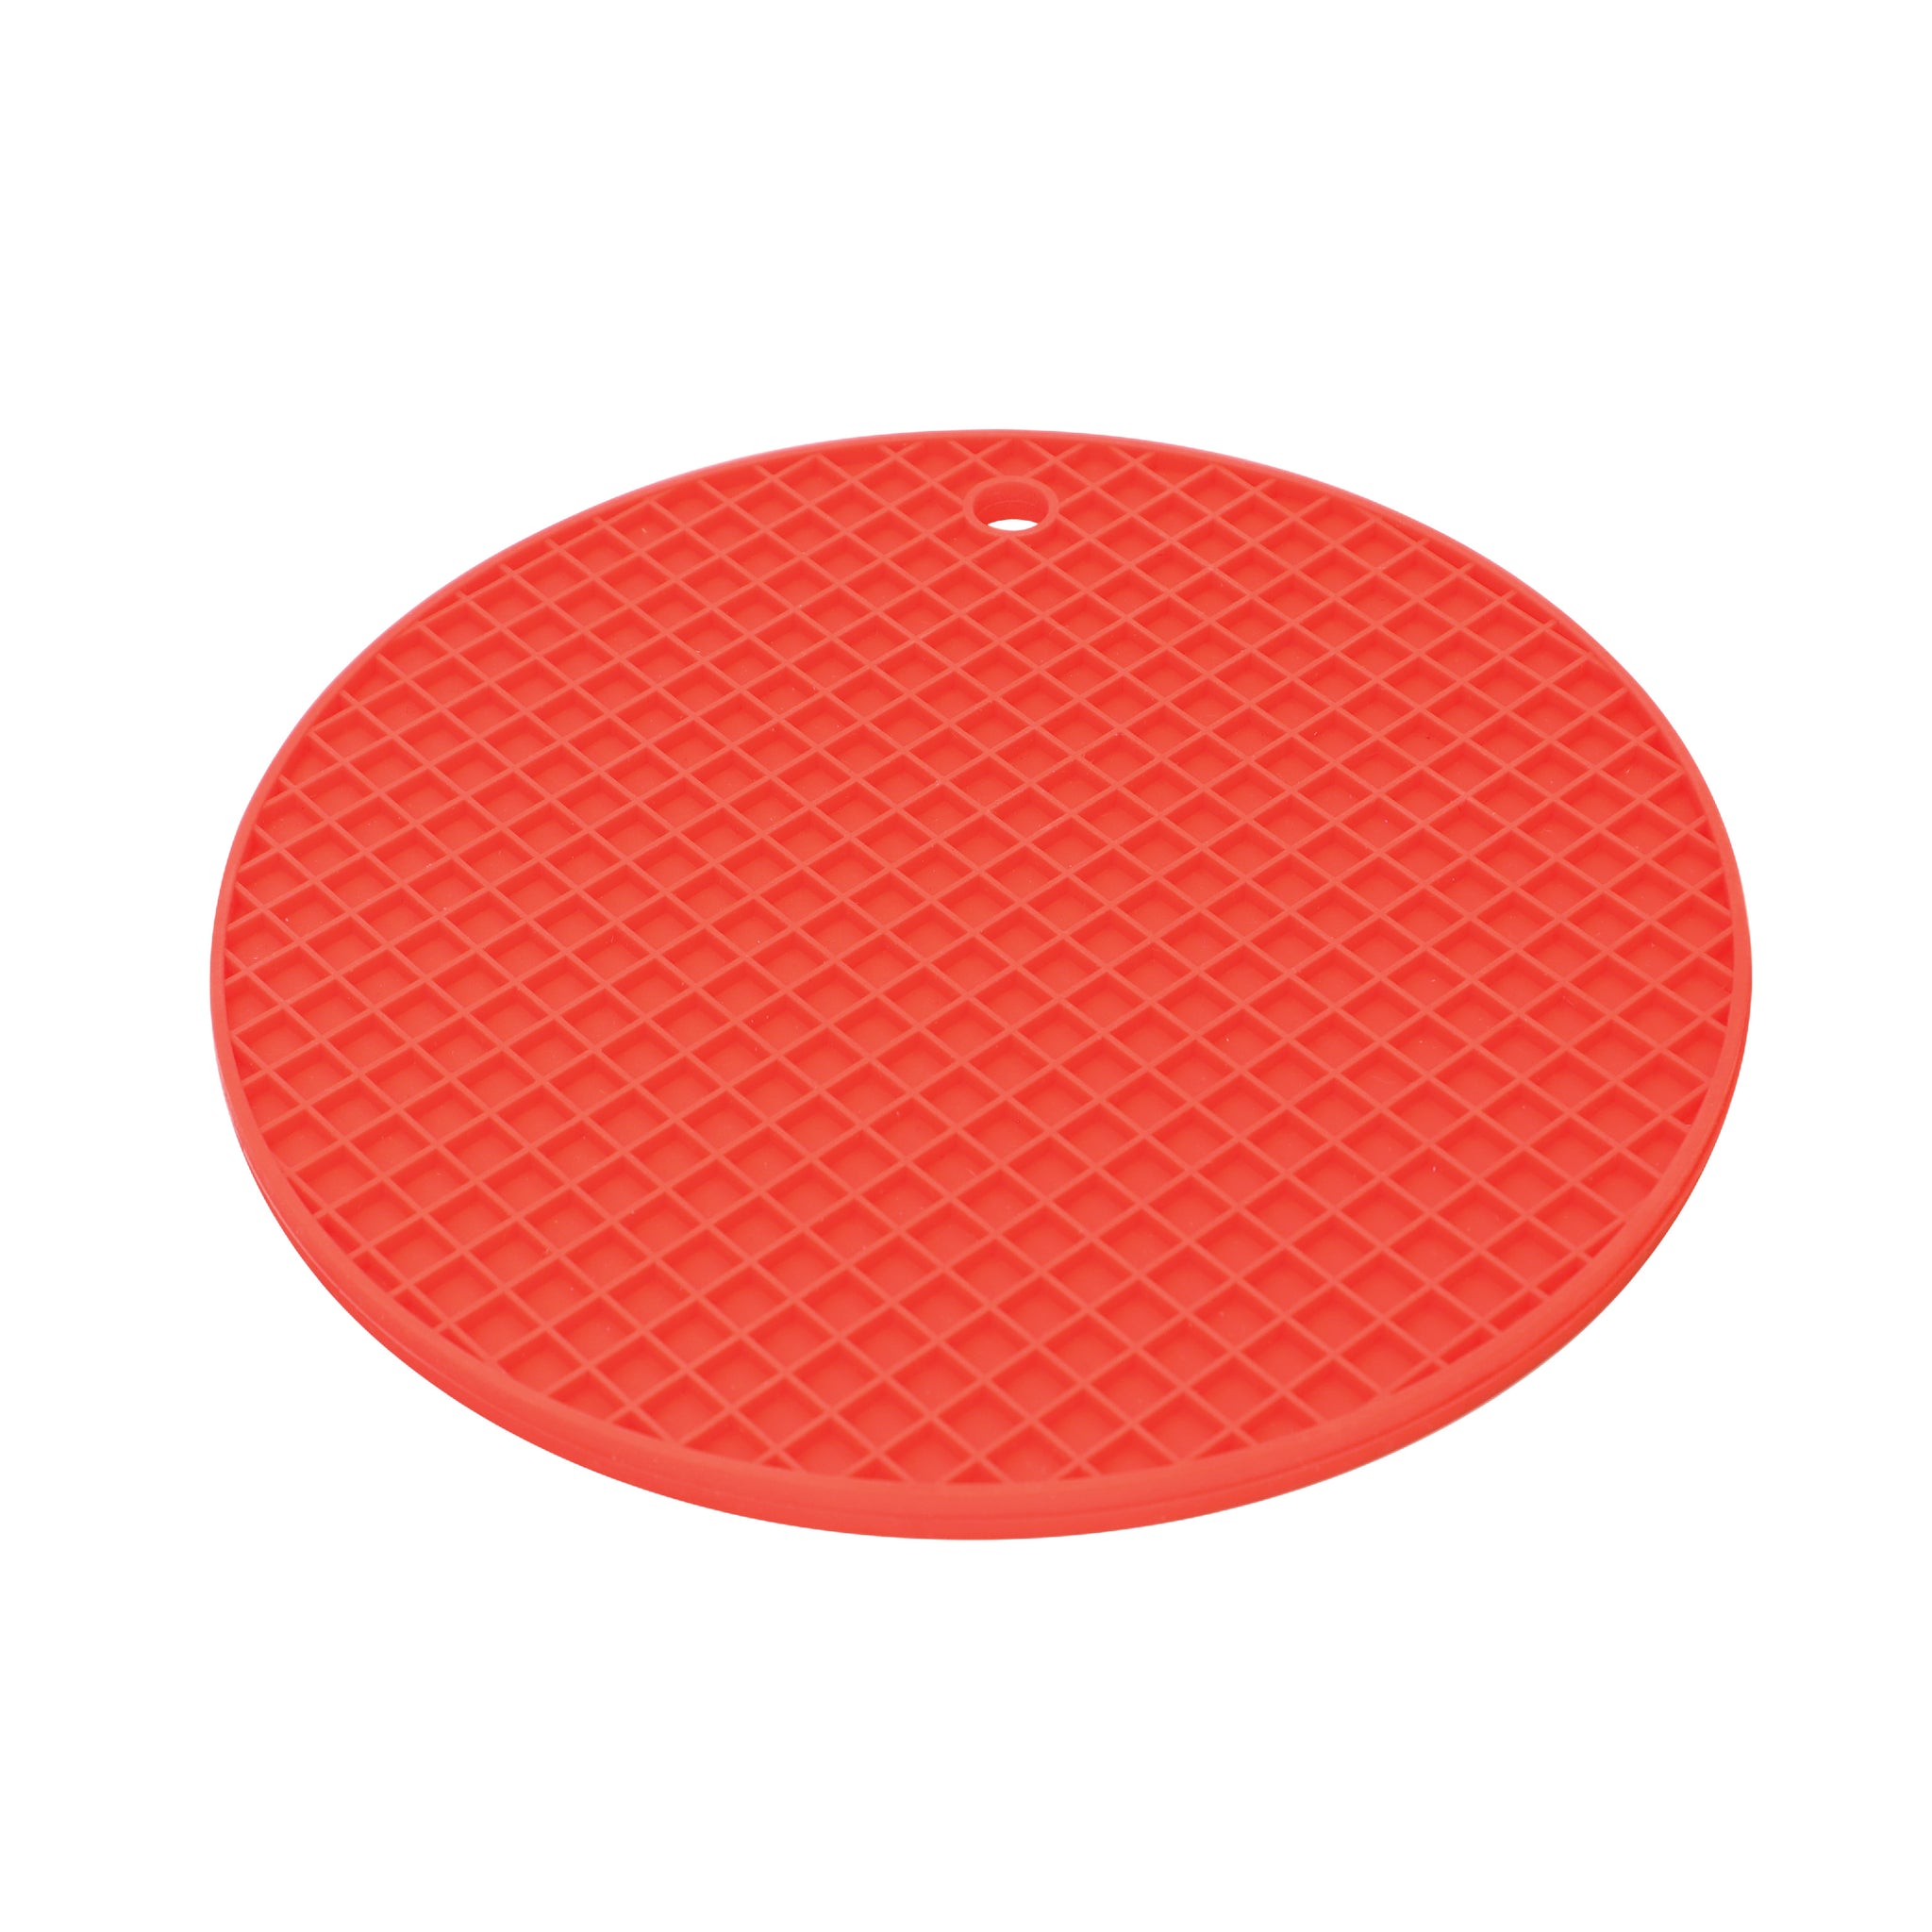 Red Silicone Dish Mat & Trivet 17.8 x 15.8 – Tortuga Home Goods